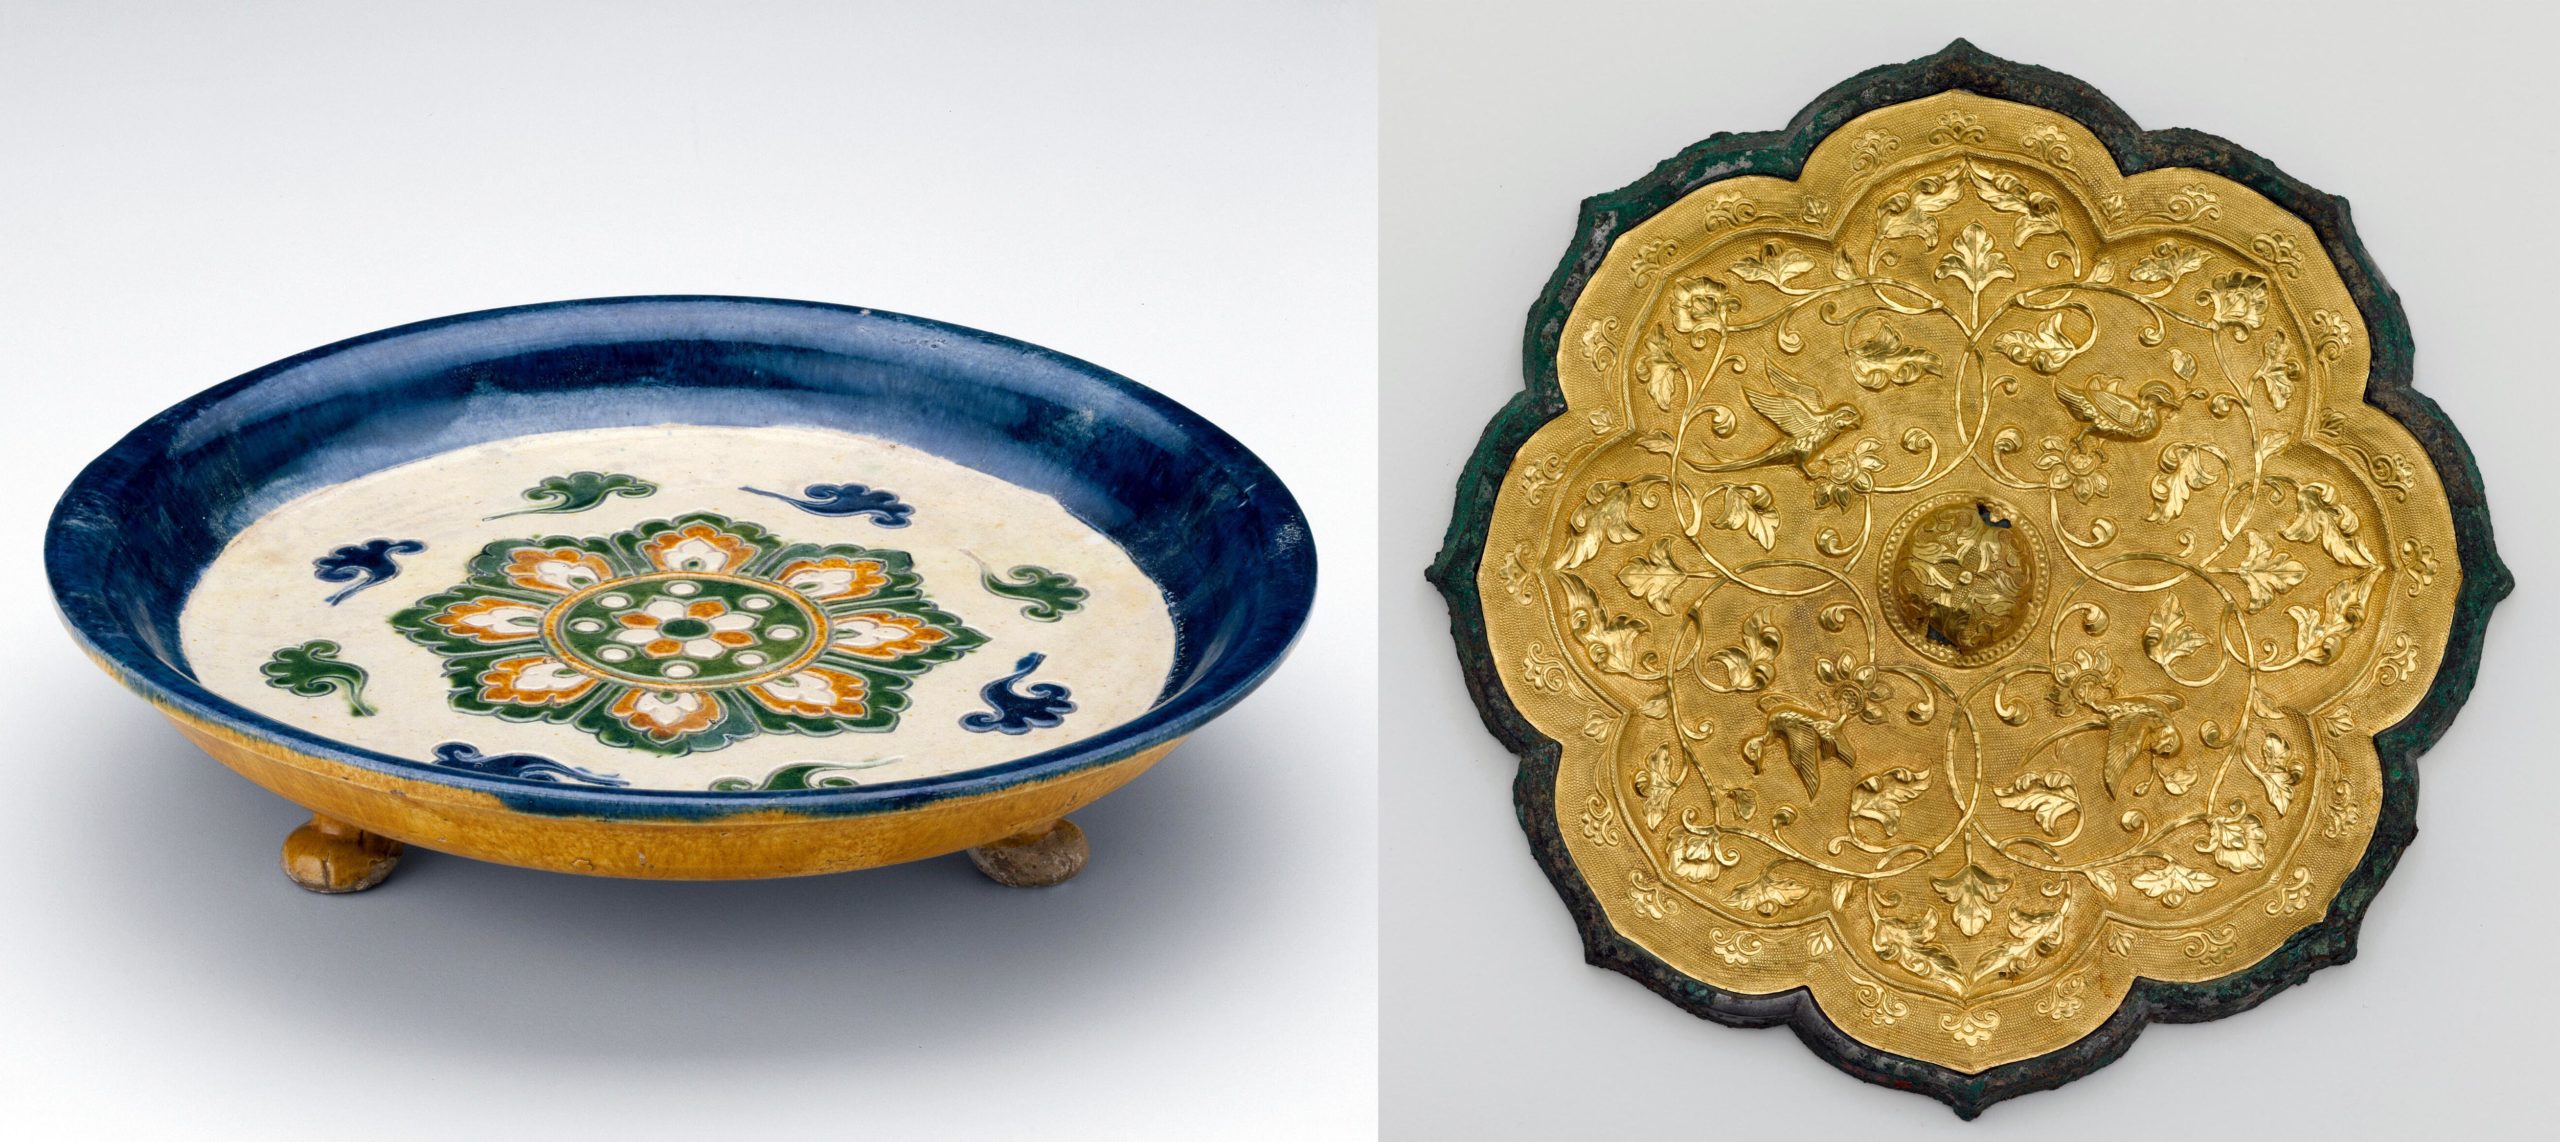 Left: Footed Dish with Lotus Medallion and Cloud Scrolls, first half of 8th century, Tang dynasty, earthenware with impressed decoration and three-color (sancai) lead glazes, China, 6.3 cm high, 29.5 cm in diameter (Art Institute of Chicago); right: Foliated mirror with birds and floral scrolls, late 7th-early 8th century, Tang dynasty, cast bronze and applied gold plaque with repoussé, chased, and ring-punched decoration, China, 22.1 cm in diameter (Freer Gallery of Art)